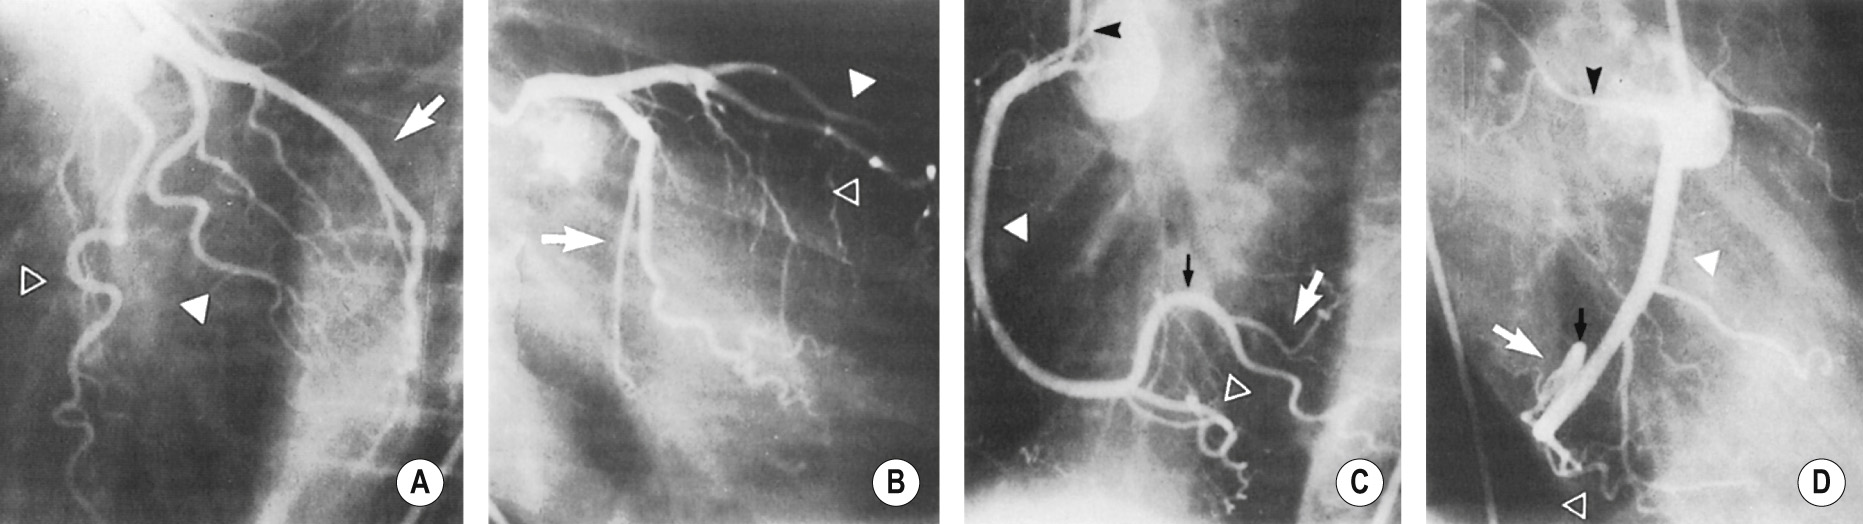 Normal coronary arteriography. (A,B) Left coronary artery: the normal coronary artery has a smooth, gently tapering outline. (A) Left anterior oblique (LAO) projection ▸ (B) right anterior oblique (RAO) projection. Open arrowhead = left anterior descending artery (LAD), solid arrowhead = diagonal, branch arrow = circumflex/obtuse marginal vessels. In (B) the LAD and its diagonal branch overlap but the LAD may be identified by its septal branches and its extension to the apex of the heart. The small circumflex branch (arrow) has the characteristic straight appearance which suggests that it is running in the left atrioventricular (AV) groove. The larger obtuse marginal branch has left the AV groove and is running on the surface of the left ventricle. (C,D) Right coronary artery: (C) LAO projection ▸ (D) RAO projection. Solid white arrowhead = right coronary artery, open arrowhead = posterior descending coronary artery, black arrowhead = sinus node artery, black arrow = inverted U at the crux, white arrow = posterolateral left ventricular branch. In (C) the entire right coronary artery is seen in profile as it passes around the heart in the right side of the AV groove. The posterior descending branch is the last branch before the crux. Beyond the crux (marked by the inverted U) are posterolateral left ventricular branches supplying the free wall of the left ventricle. In (D) both the origin and the terminal part of the right coronary artery are foreshortened but the sinus node artery (black arrowhead) can be distinguished from the conus and other right ventricular (RV) branches. As seen in (D) it runs posteriorly to the atria, whereas the conal and RV branches run anteriorly to the right ventricle. *